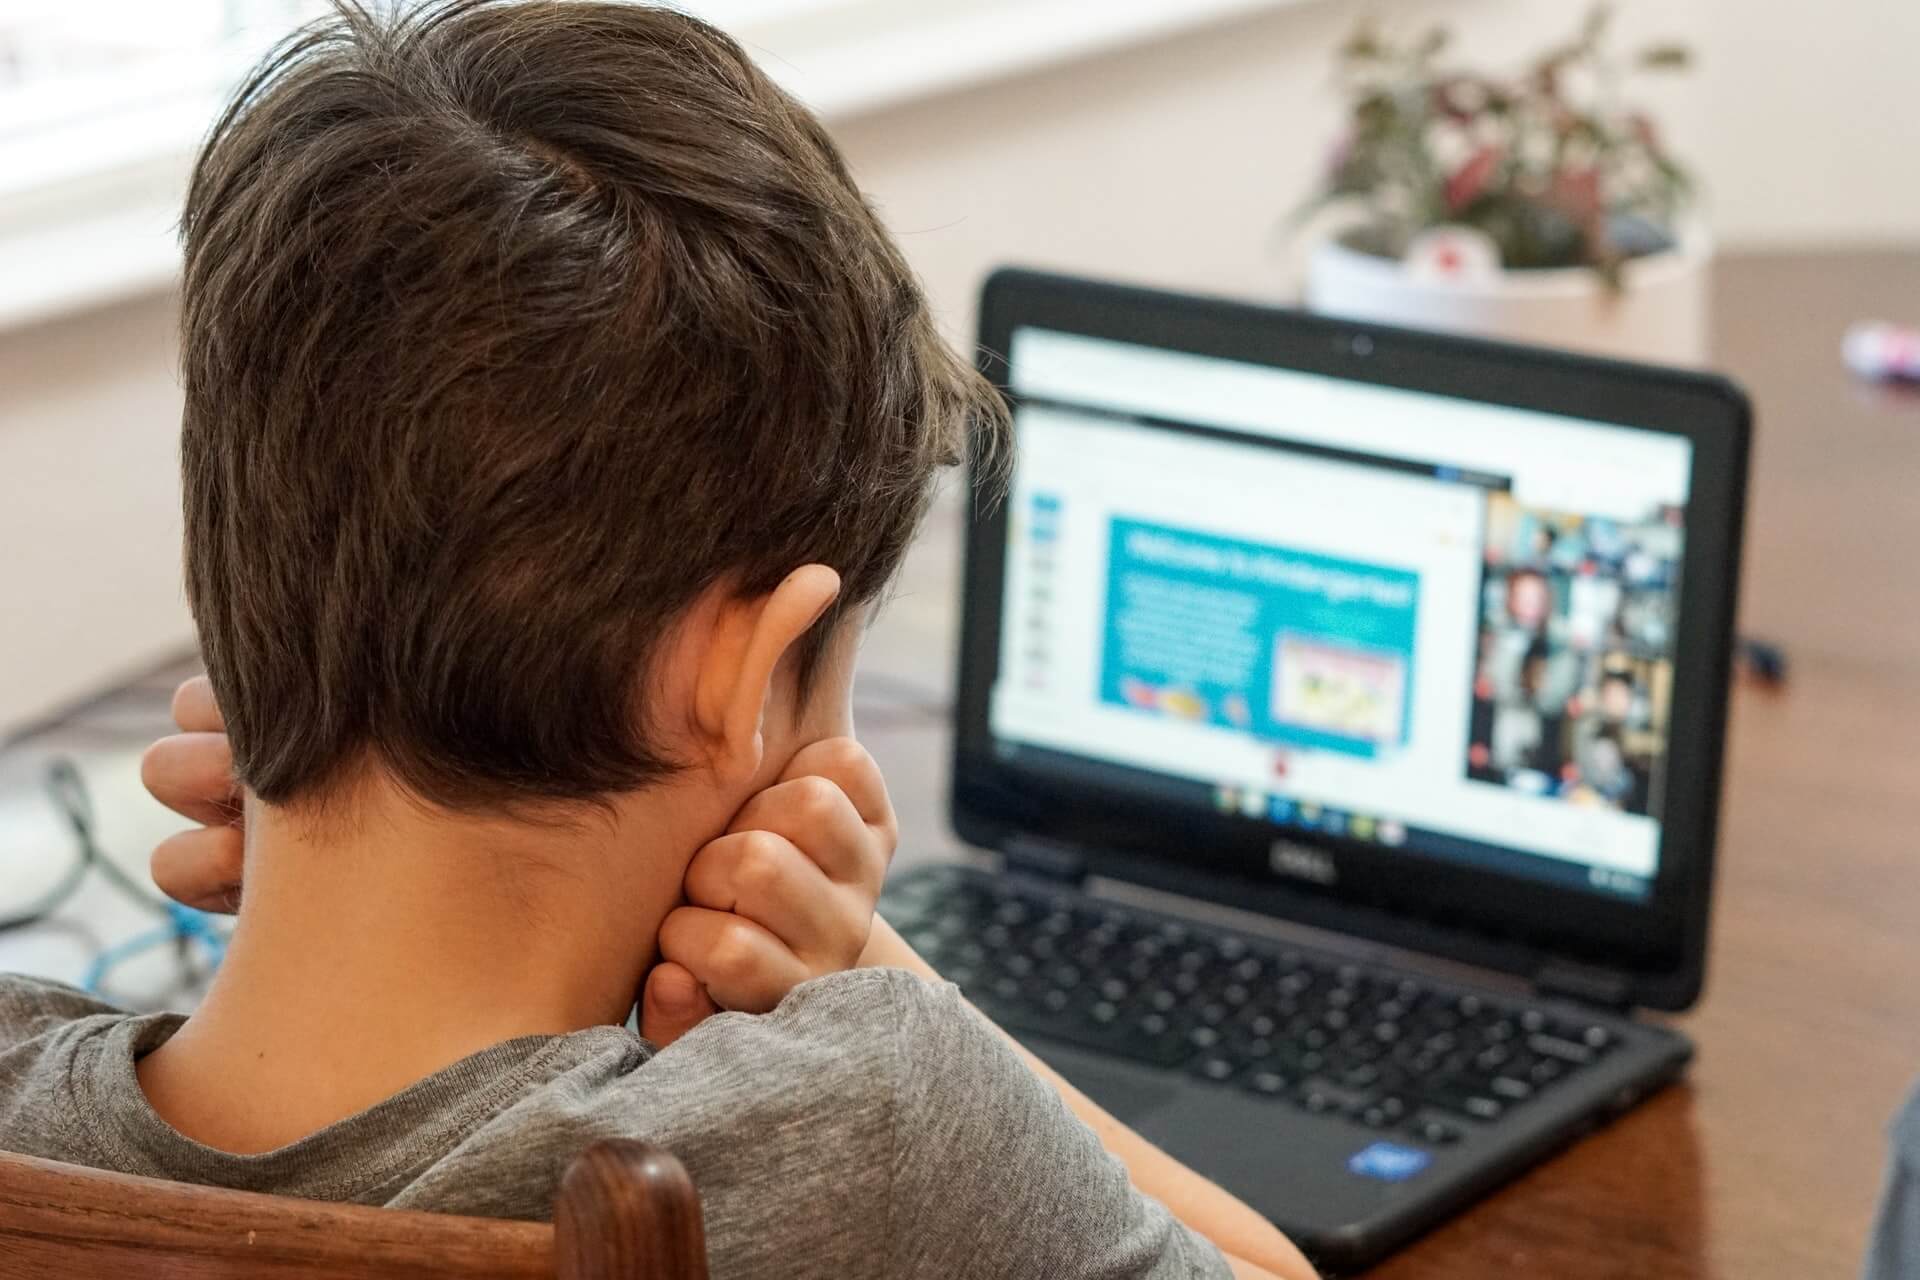 Safeguarding Children from Online Sexual Abuse